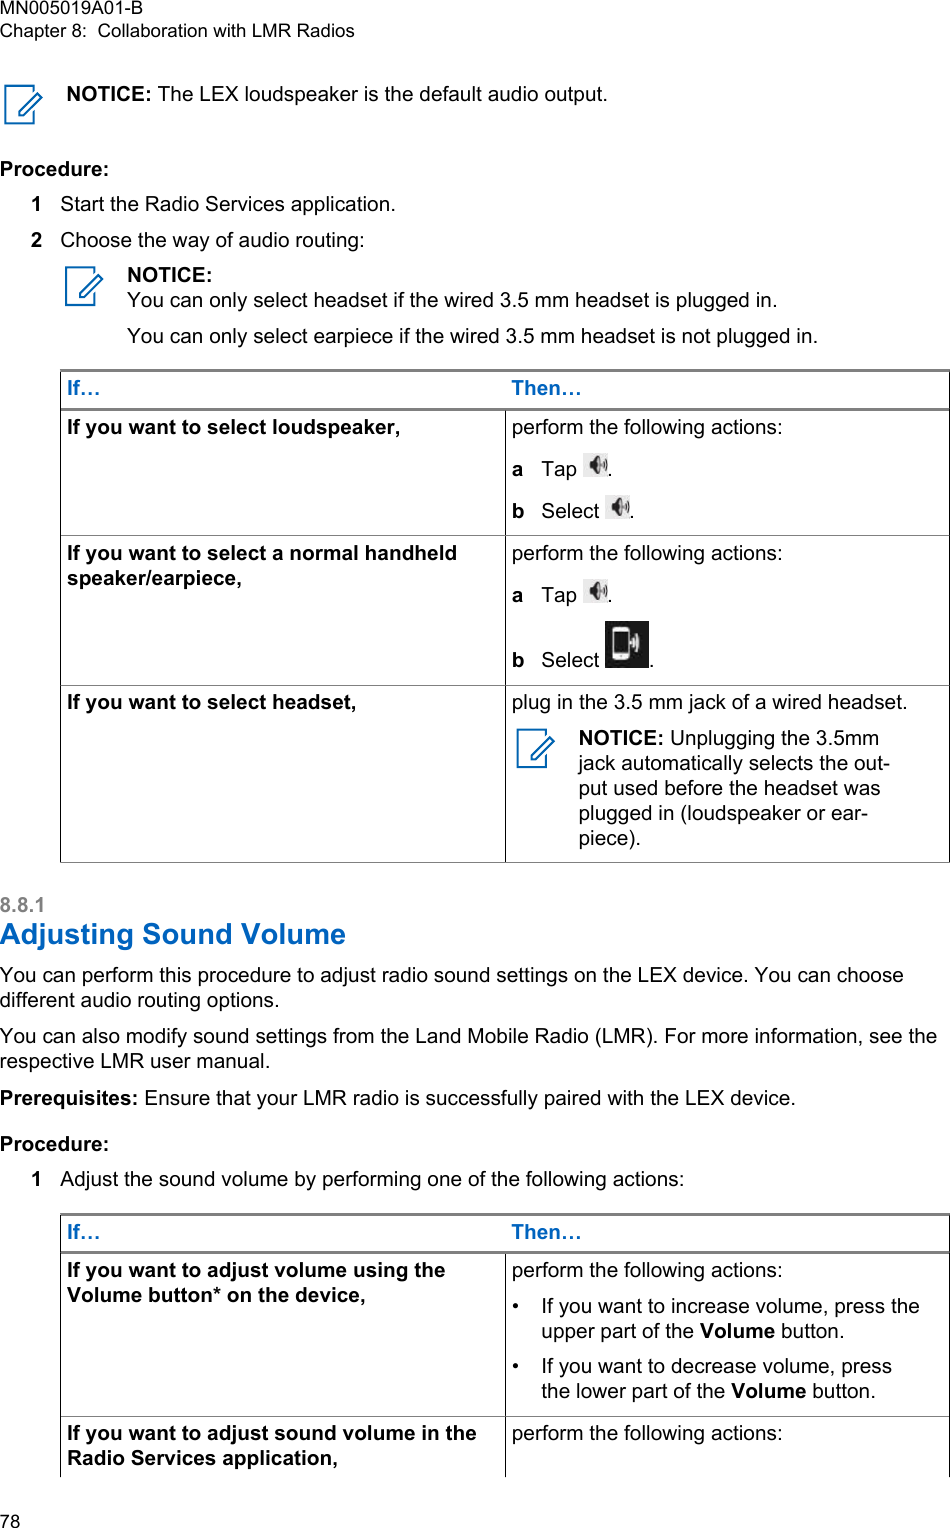 NOTICE: The LEX loudspeaker is the default audio output.Procedure:1Start the Radio Services application.2Choose the way of audio routing:NOTICE:You can only select headset if the wired 3.5 mm headset is plugged in.You can only select earpiece if the wired 3.5 mm headset is not plugged in.If… Then…If you want to select loudspeaker, perform the following actions:aTap  .bSelect  .If you want to select a normal handheldspeaker/earpiece,perform the following actions:aTap  .bSelect  .If you want to select headset, plug in the 3.5 mm jack of a wired headset.NOTICE: Unplugging the 3.5mmjack automatically selects the out-put used before the headset wasplugged in (loudspeaker or ear-piece).8.8.1Adjusting Sound VolumeYou can perform this procedure to adjust radio sound settings on the LEX device. You can choosedifferent audio routing options.You can also modify sound settings from the Land Mobile Radio (LMR). For more information, see therespective LMR user manual.Prerequisites: Ensure that your LMR radio is successfully paired with the LEX device.Procedure:1Adjust the sound volume by performing one of the following actions:If… Then…If you want to adjust volume using theVolume button* on the device,perform the following actions:•If you want to increase volume, press theupper part of the Volume button.• If you want to decrease volume, pressthe lower part of the Volume button.If you want to adjust sound volume in theRadio Services application,perform the following actions:MN005019A01-BChapter 8:  Collaboration with LMR Radios78  